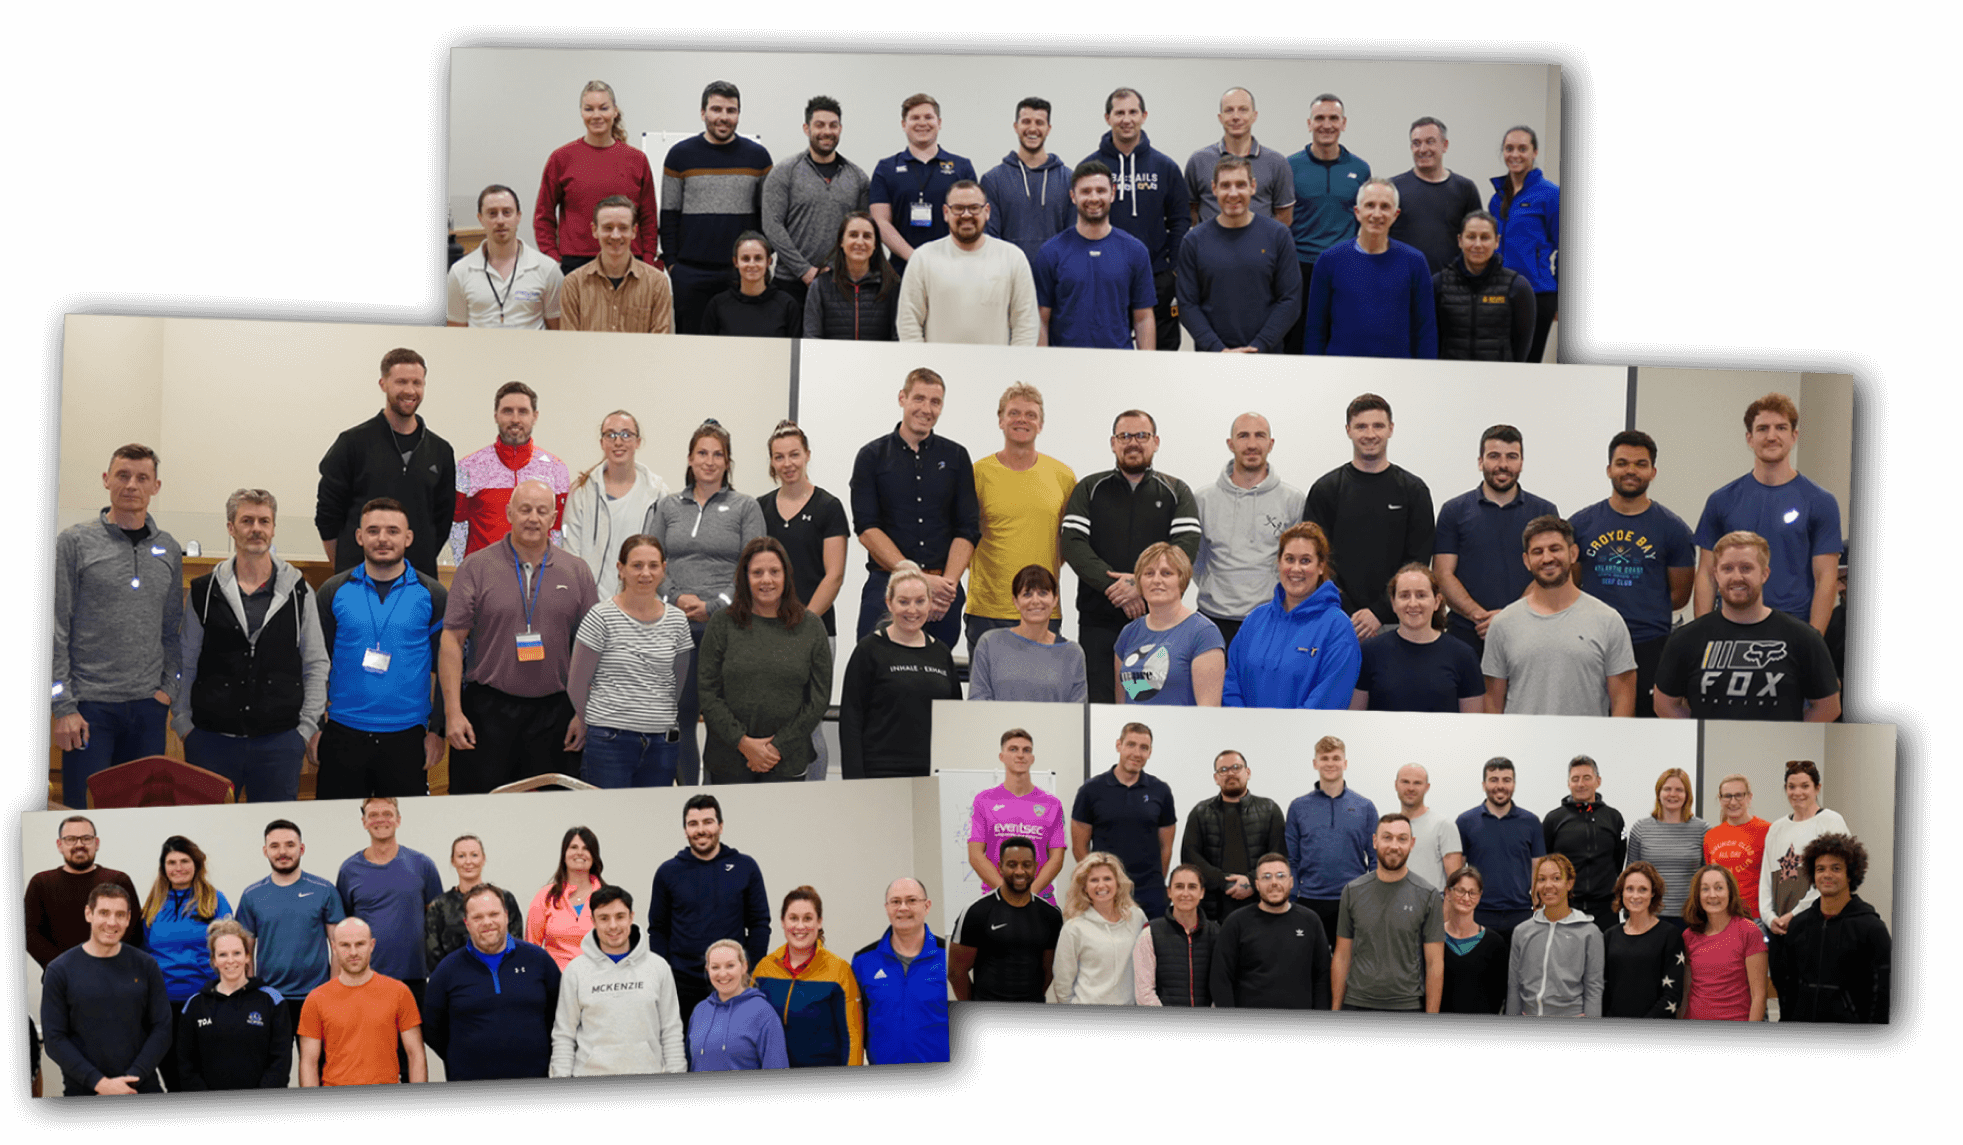 Physiotherapists private practice clinic owners trained by Dave O’Sullivan in the Go-To Physio Method